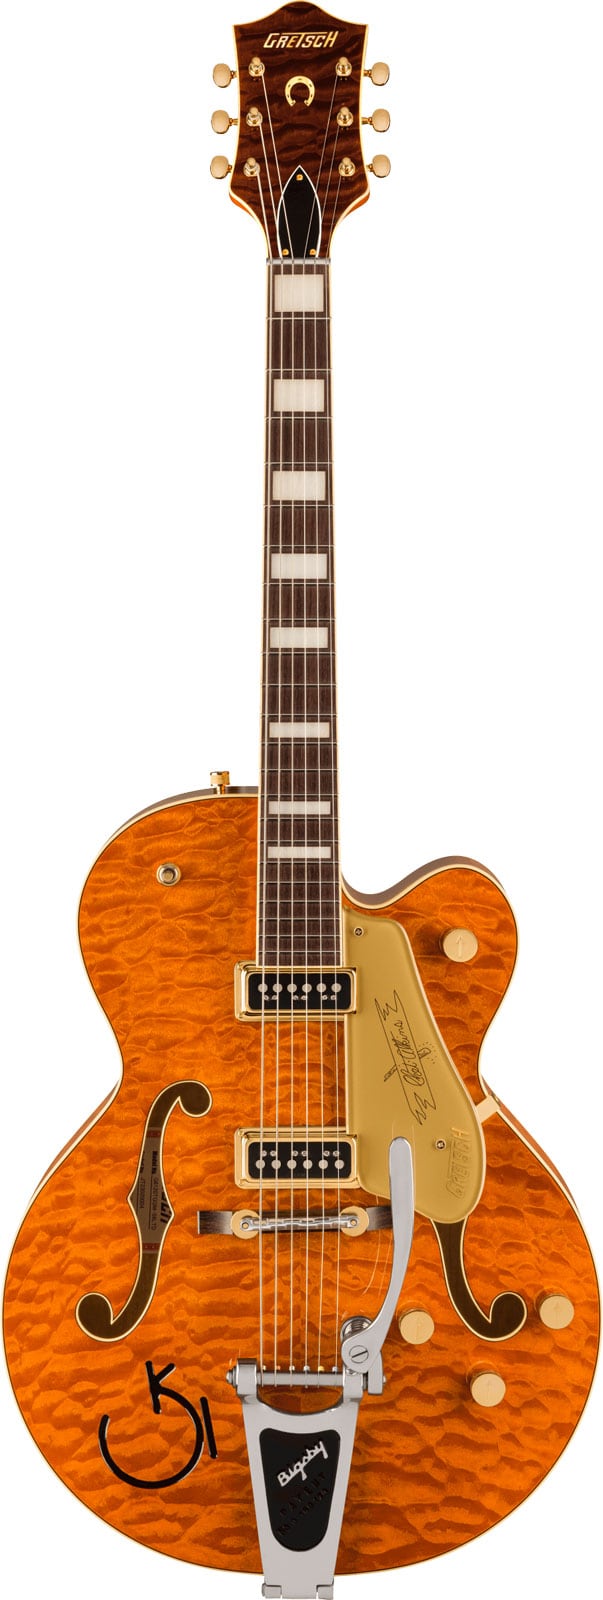 GRETSCH GUITARS G6120TGQM-56 LTD QUILT CLASSIC CHET ATKINS HOLLOW BODY WITH BIGSBY, ROUNDUP ORANGE STAIN LACQUER